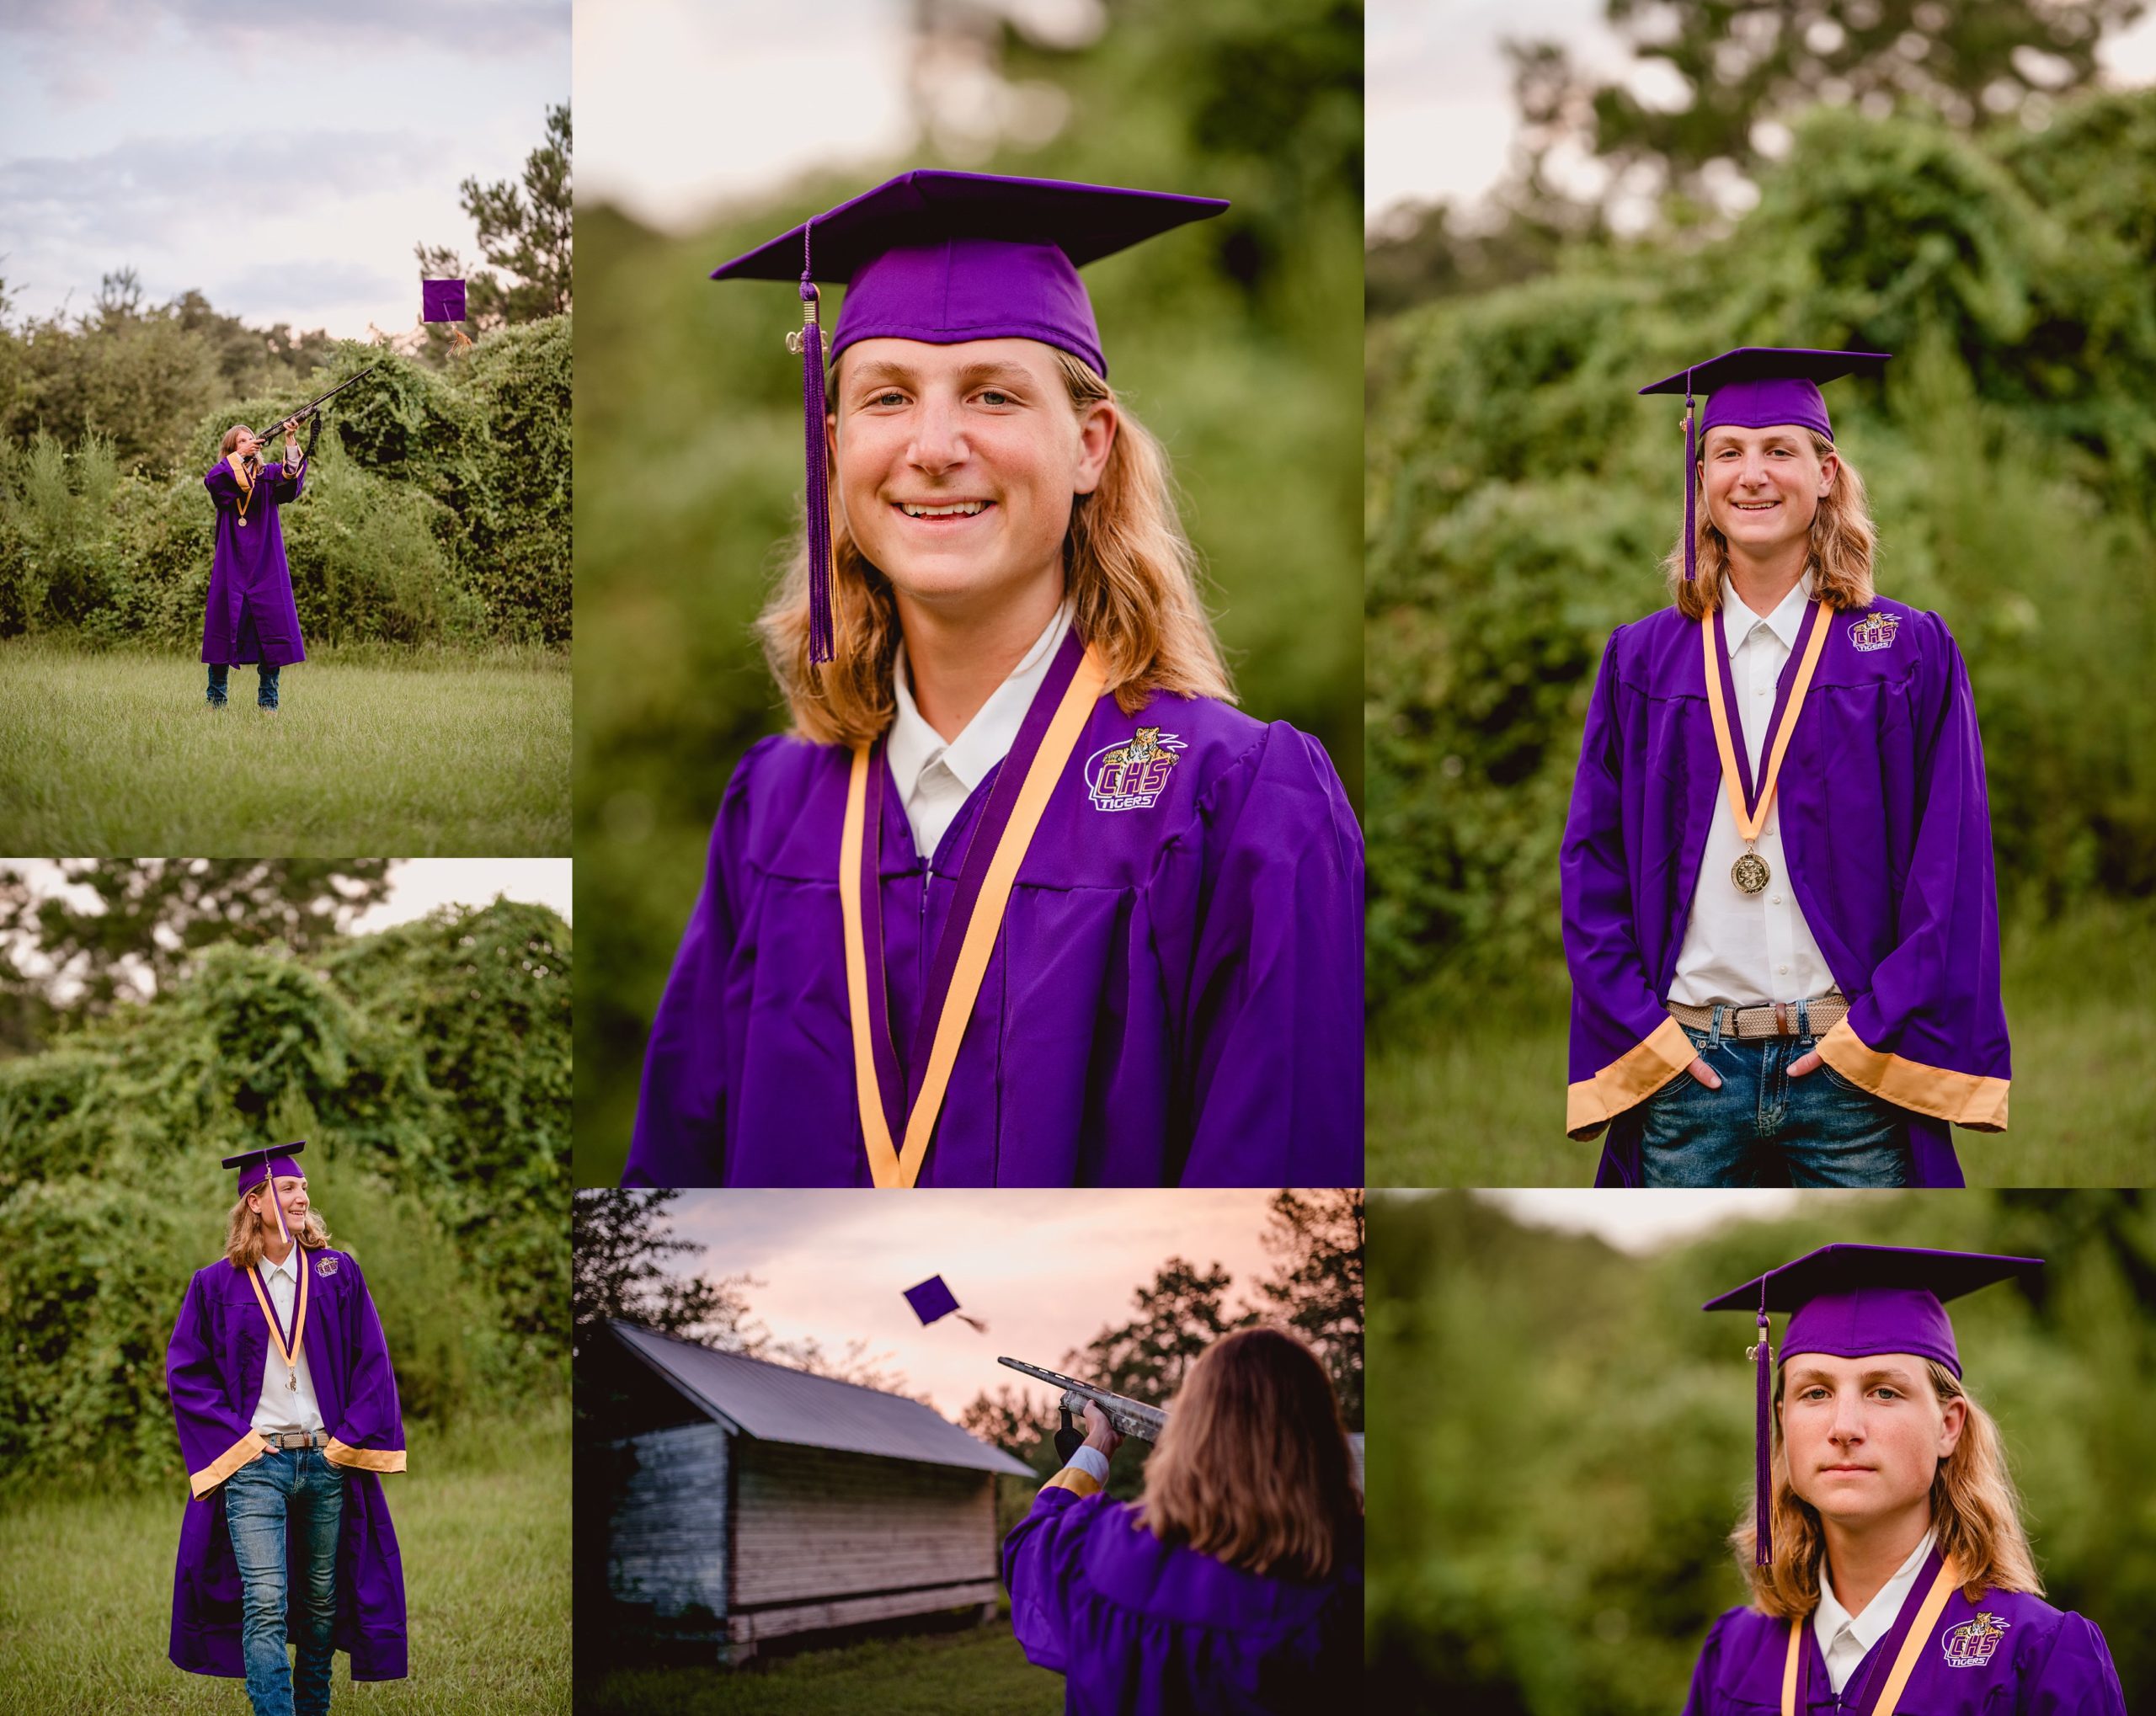 Lake city senior photos with cap and gown.